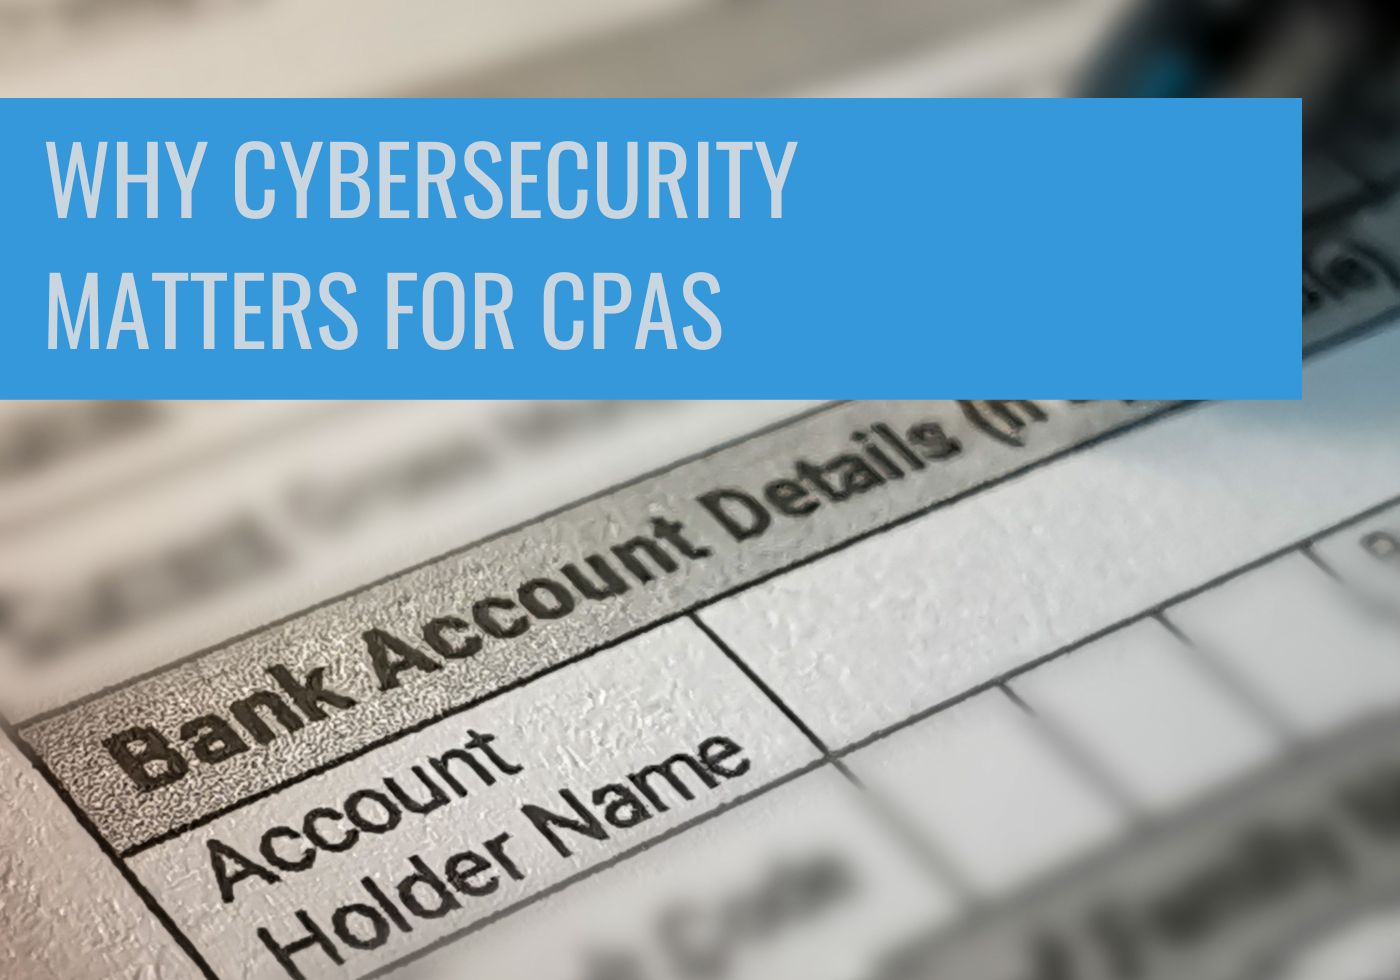 Why Cybersecurity matters for CPAS